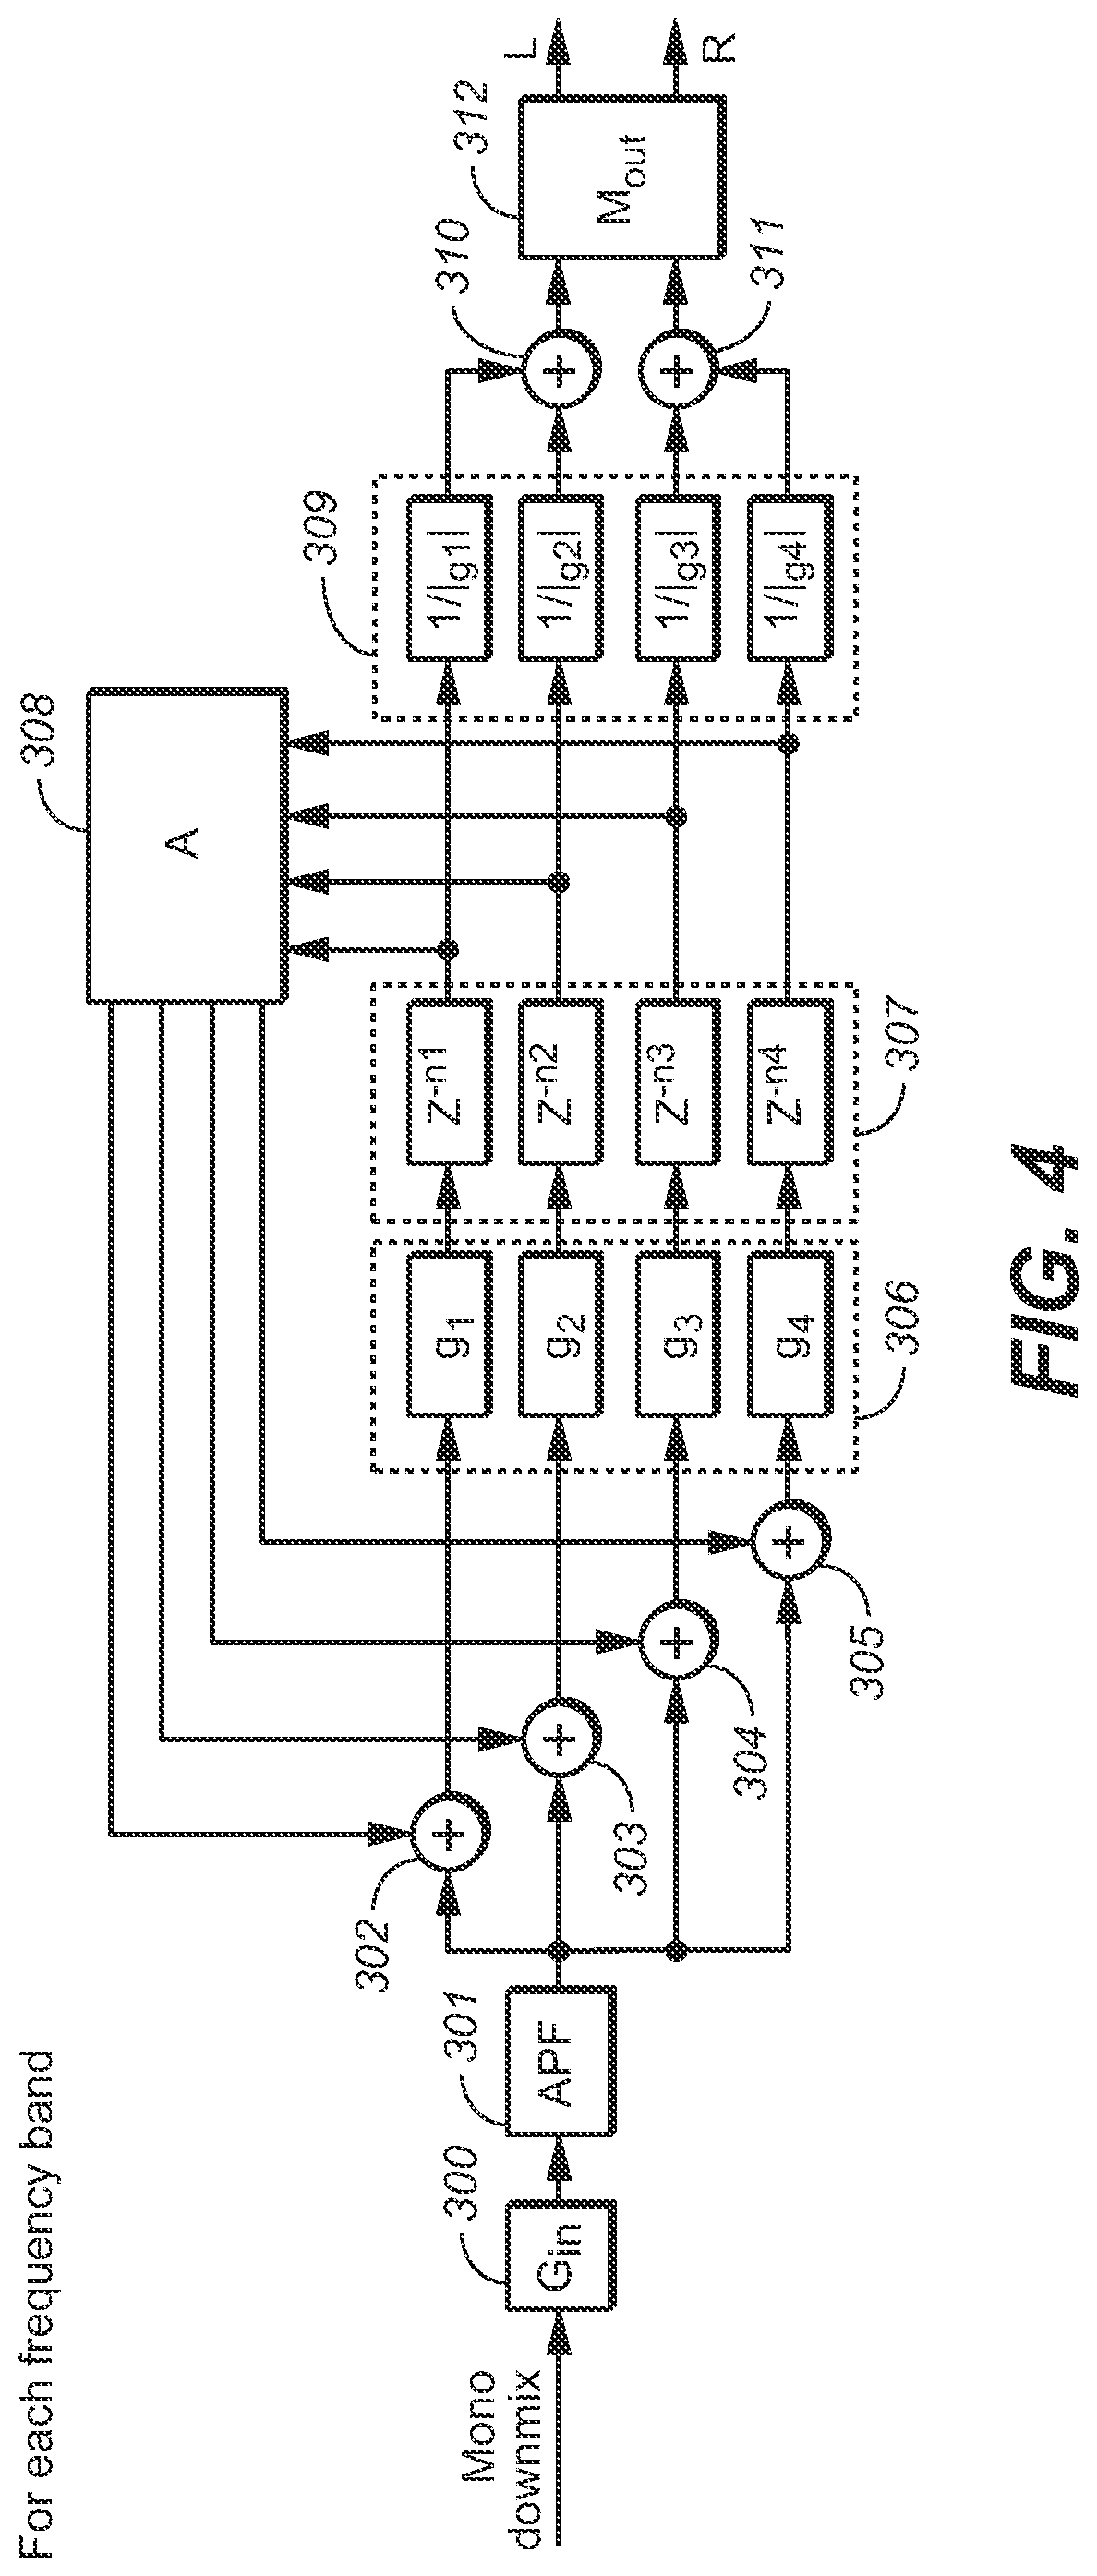 Generating Binaural Audio in Response to Multi-Channel Audio Using at Least One Feedback Delay Network